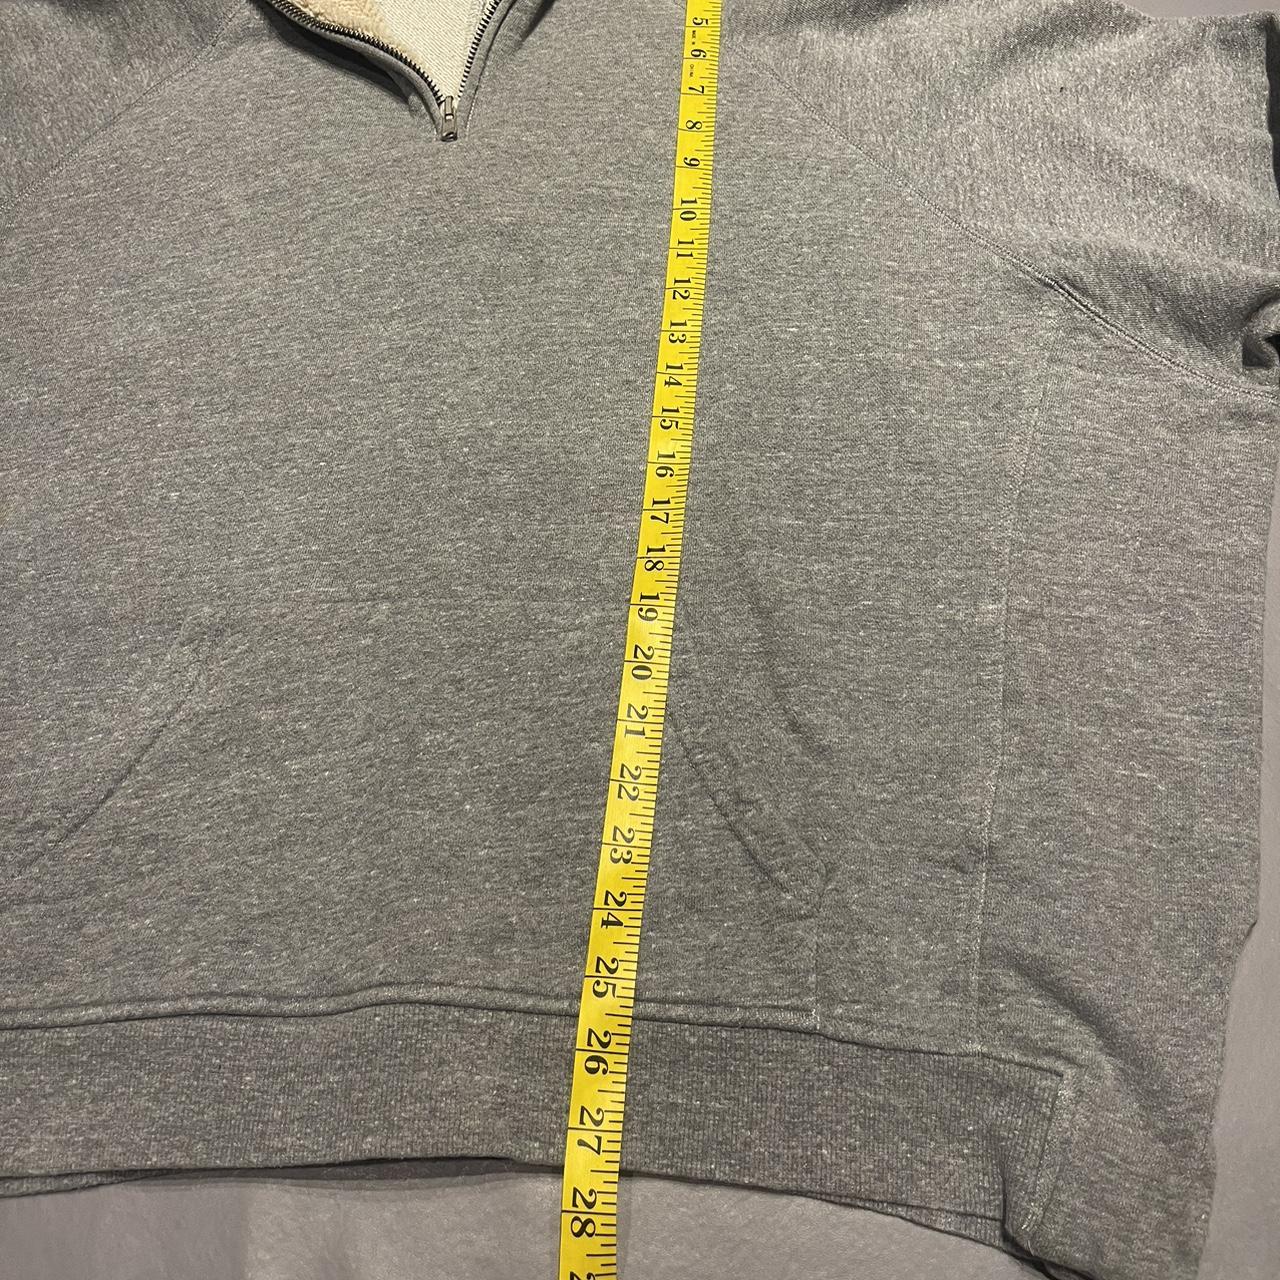 FEAR OF GOD Fourth Collection Grey 1/4 Zip Sherpa... - Depop